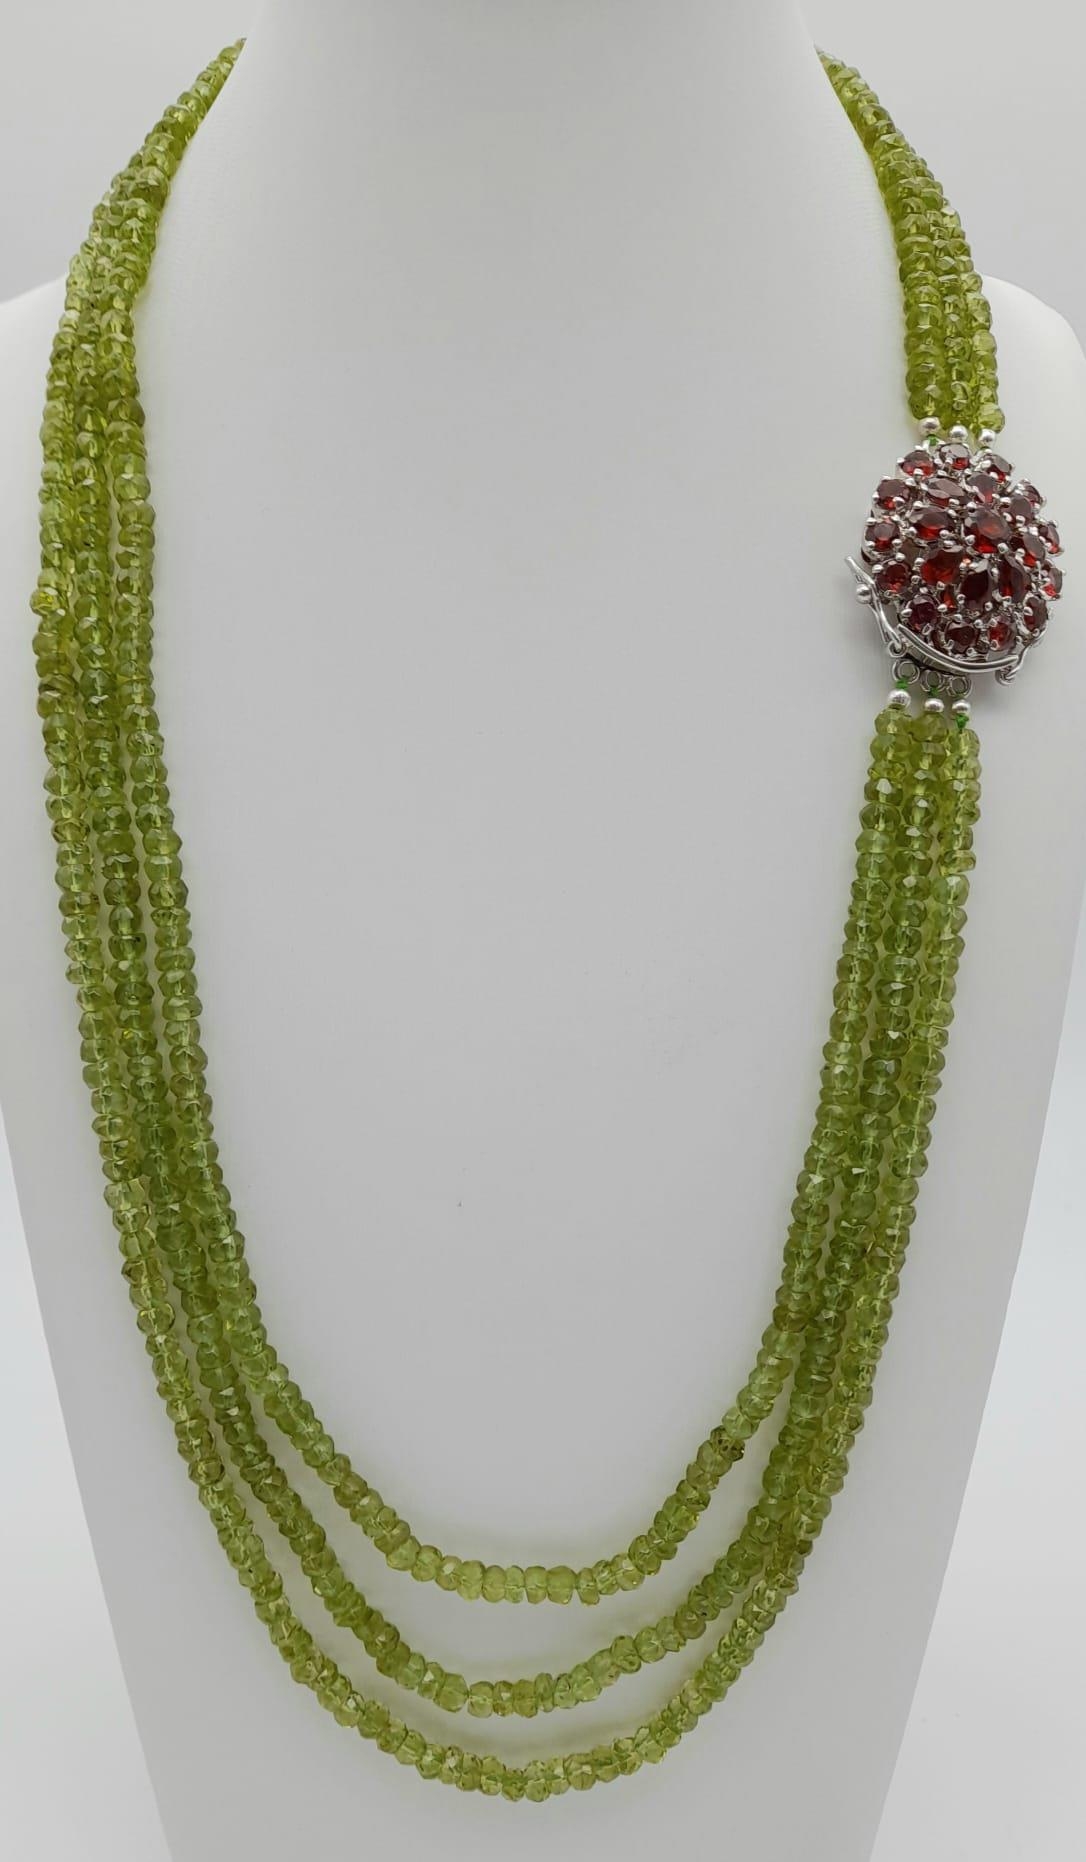 3 Row Peridot Gemstone Necklace with Garnet Clasp in 925 Silver, 440cts in total , Comes on side - Image 2 of 4